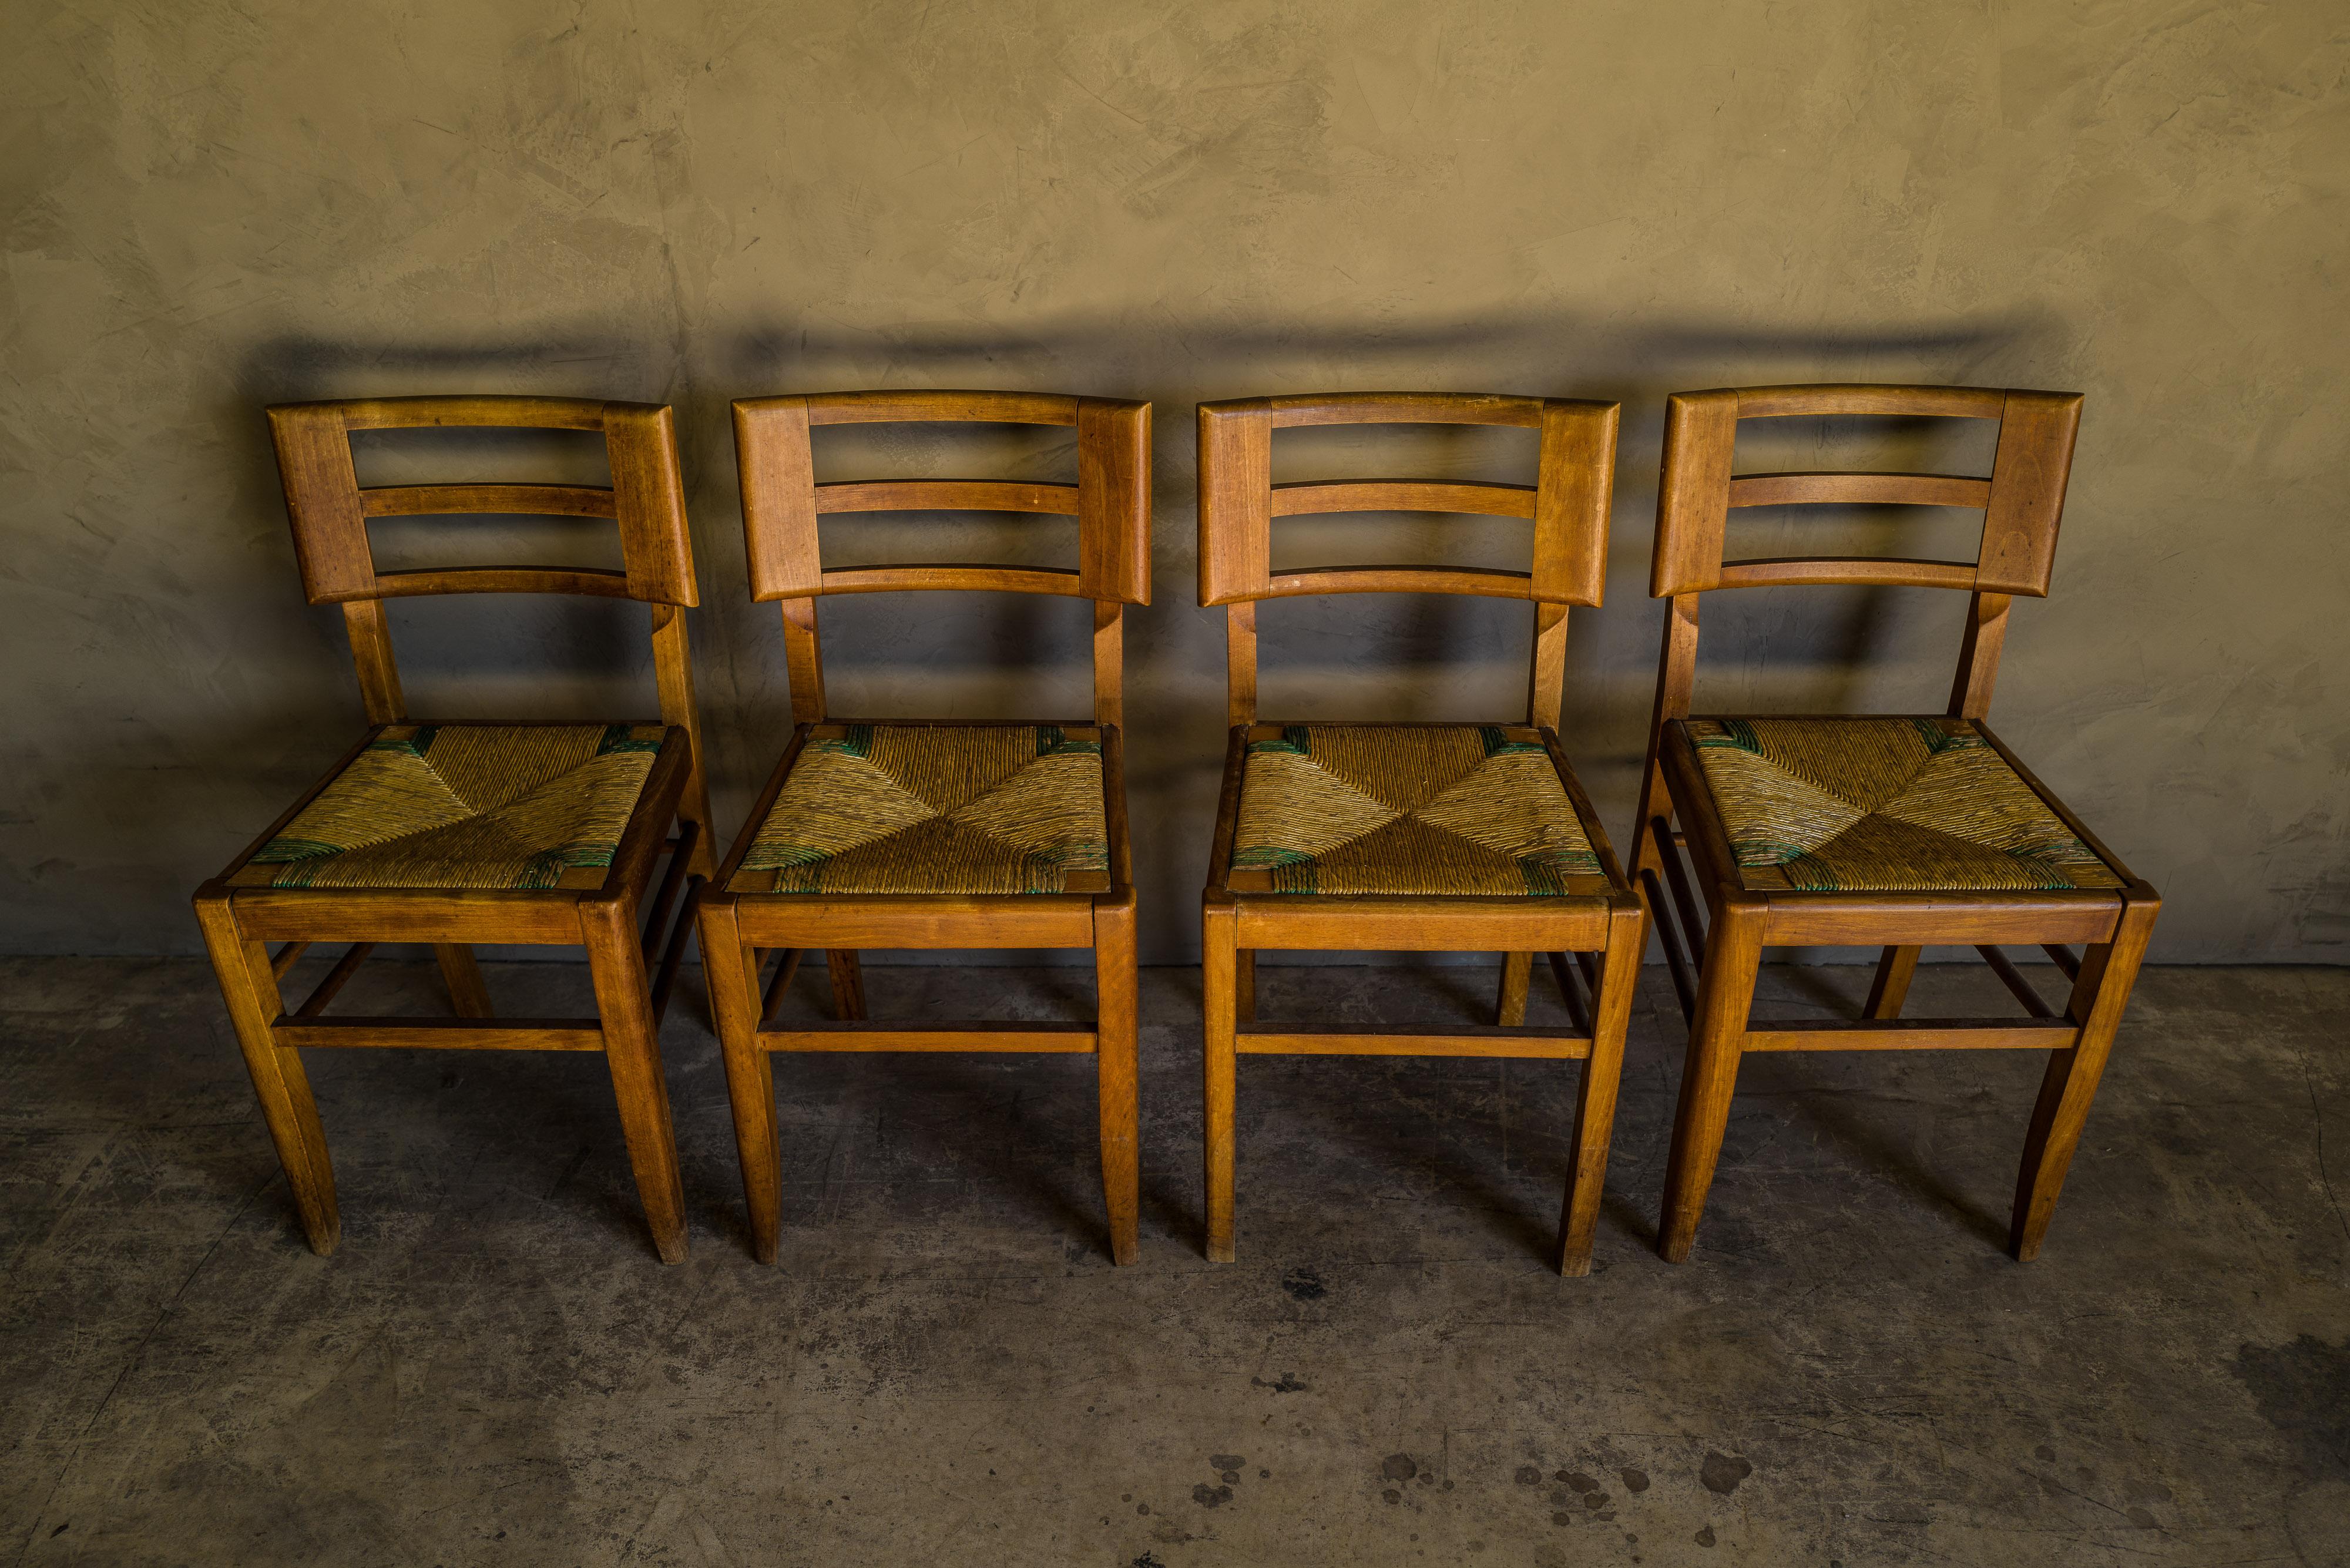 Set of four dining chairs by Pierre Cruege, France, 1940s. Solid oak construction with cane seats. Light wear and patina.